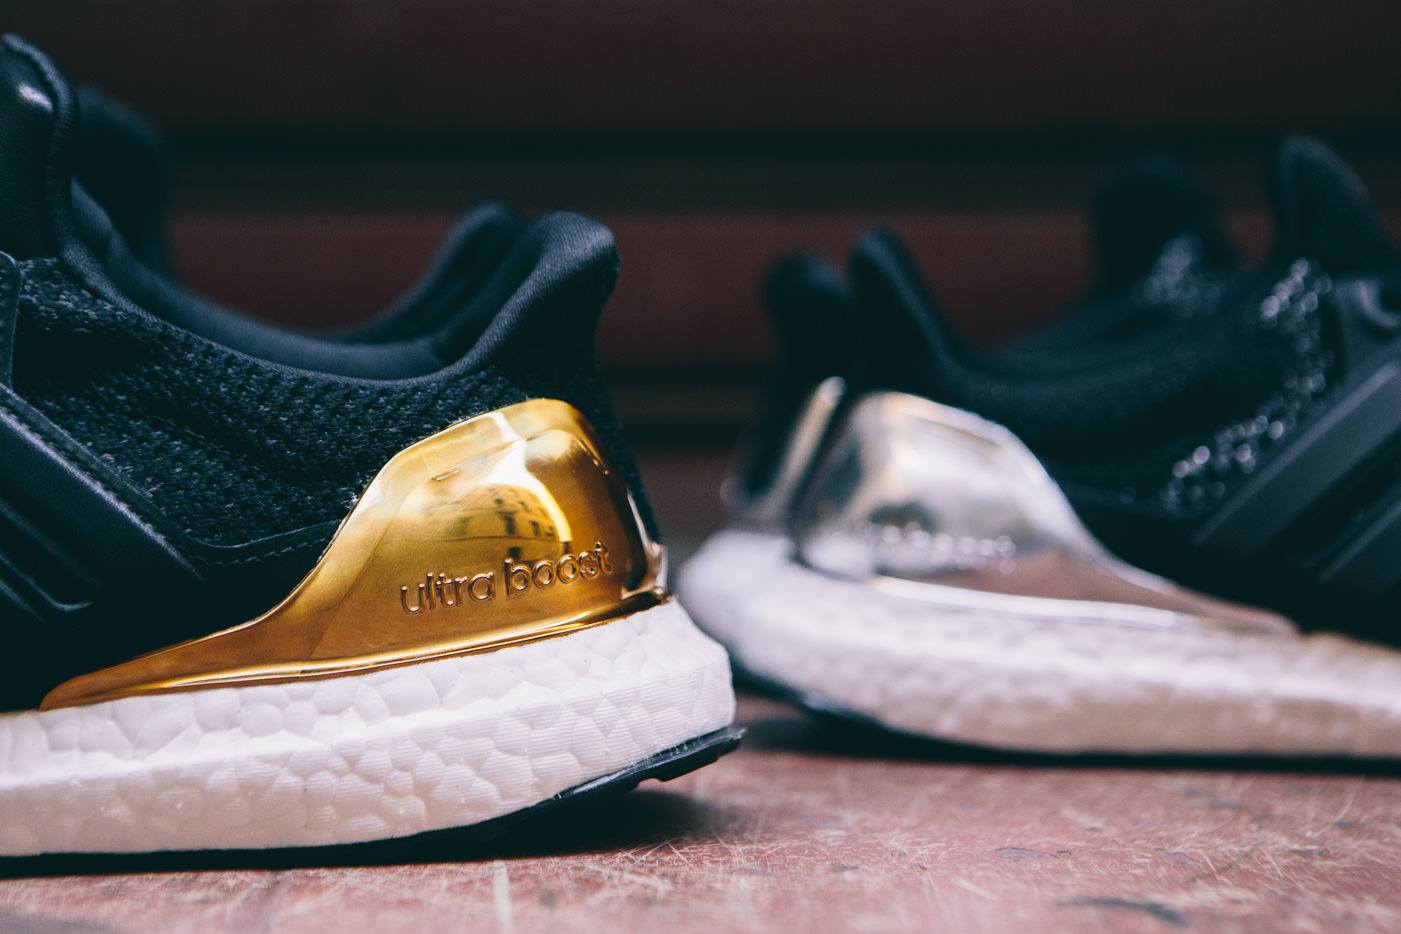 gold medal ultra boost